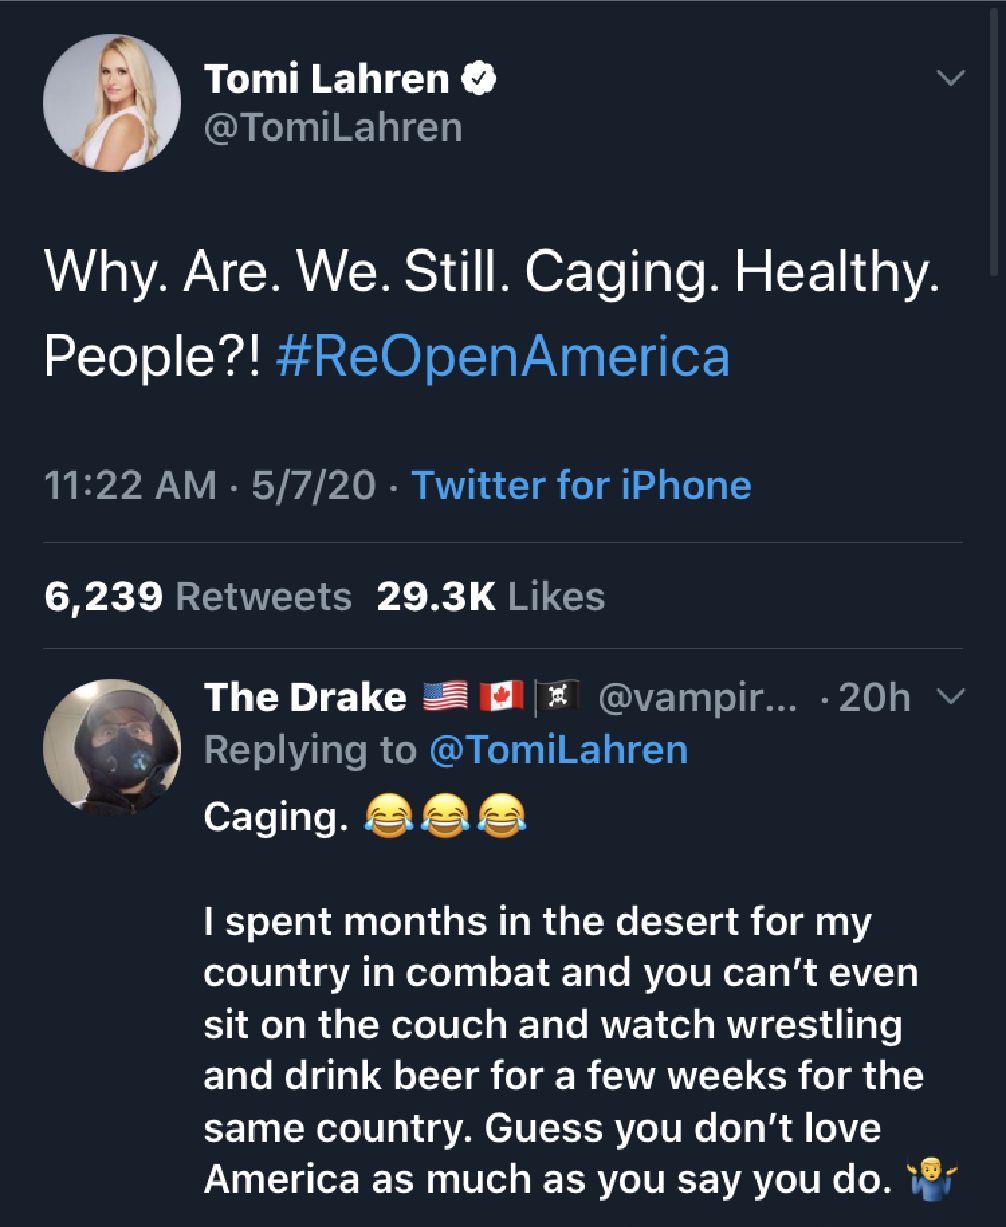 funny comments - Why. Are. We. Still. Caging. Healthy. People?! - Caging. I spent months in the desert for my country in combat and you can't even sit on the couch and watch wrestling and drink beer